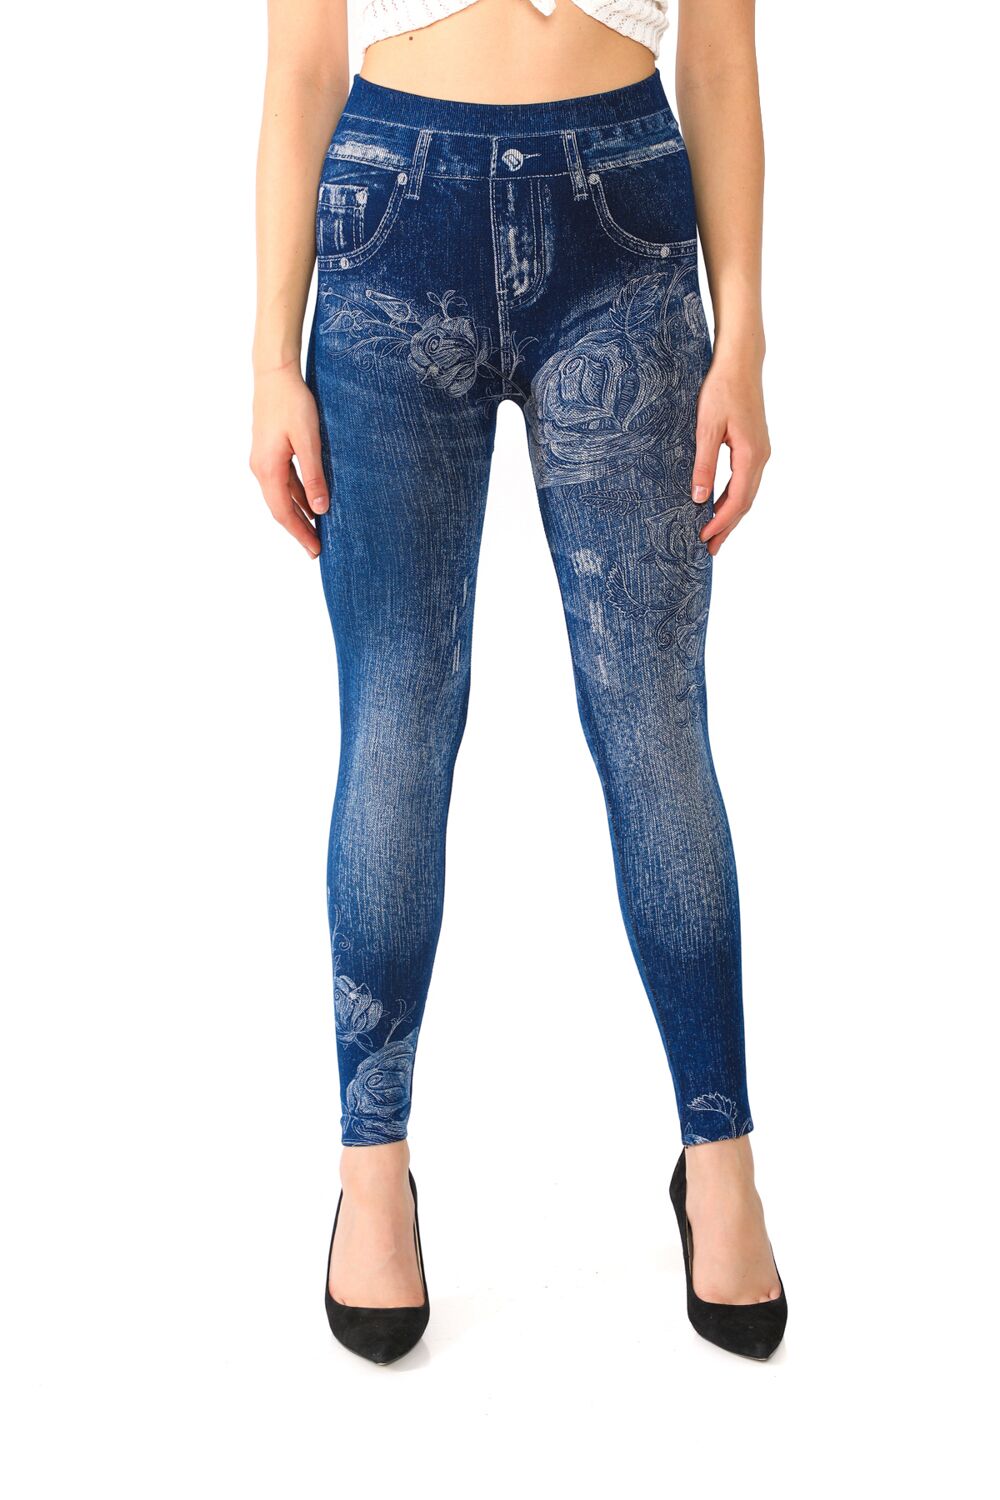 Denim Leggings with Rosy Floral Pattern - 2